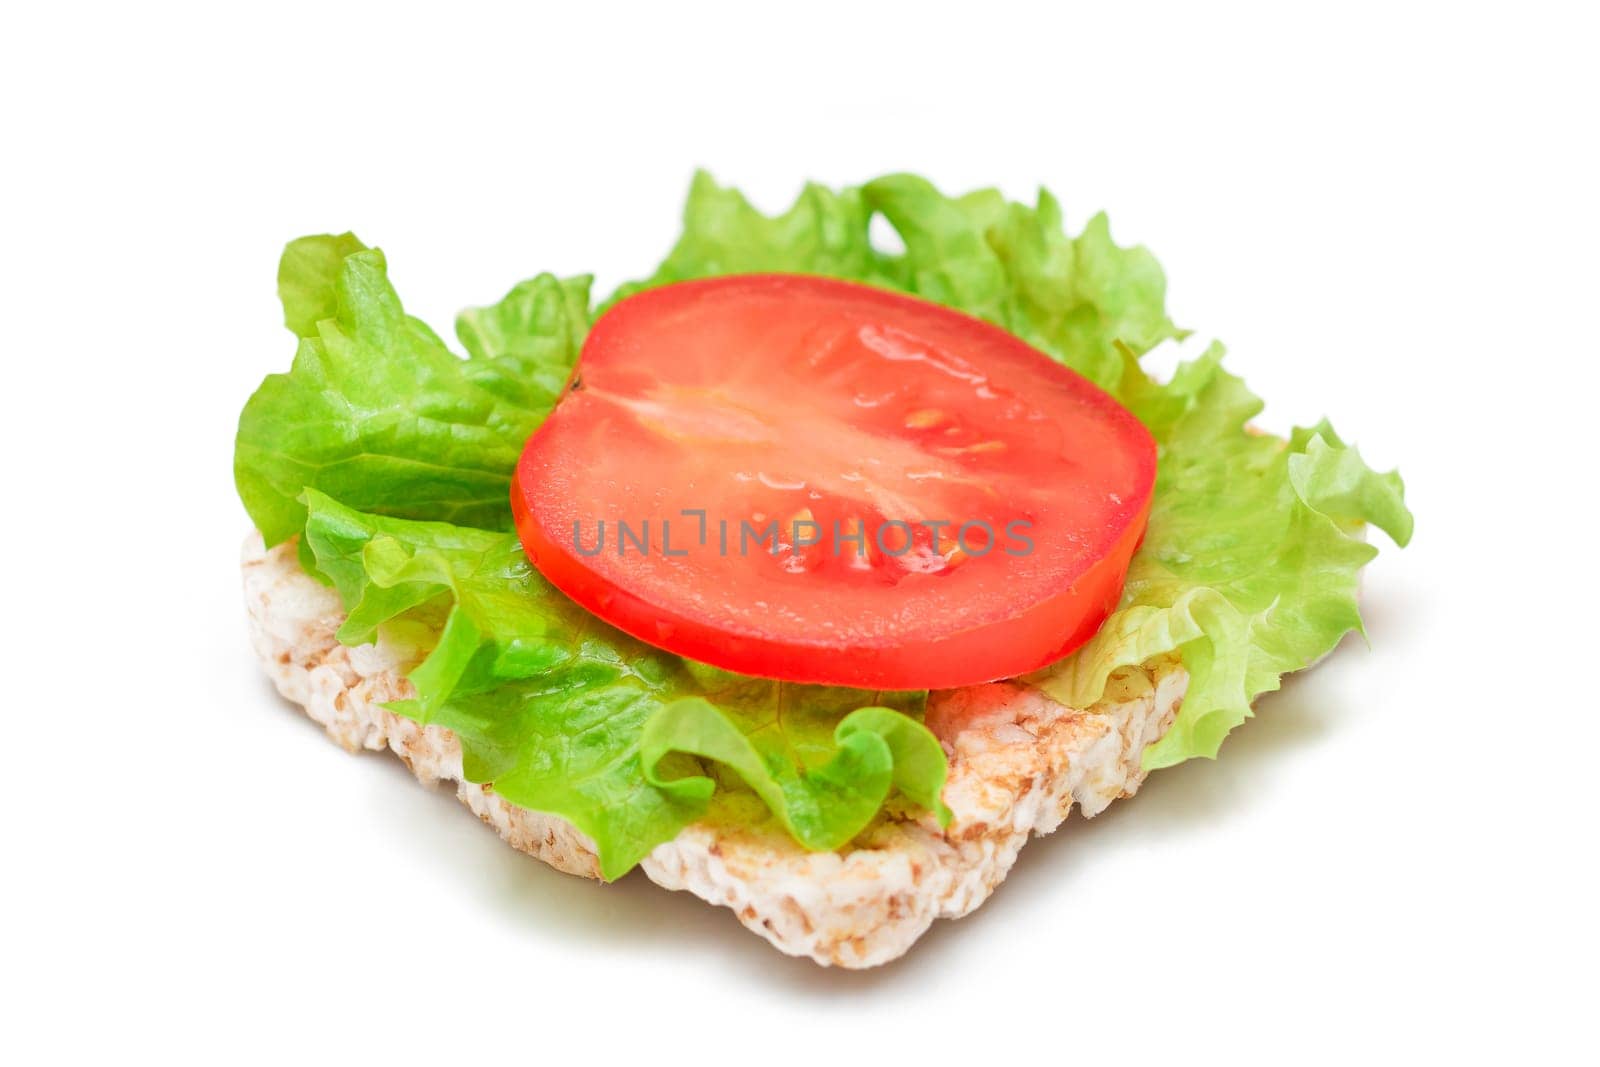 Rice Cake Sandwich with Tomato and Lettuce - Isolated on White. Easy Breakfast. Diet Food. Quick and Healthy Sandwiches. Crispbread with Tasty Filling. Healthy Dietary Snack - Isolation